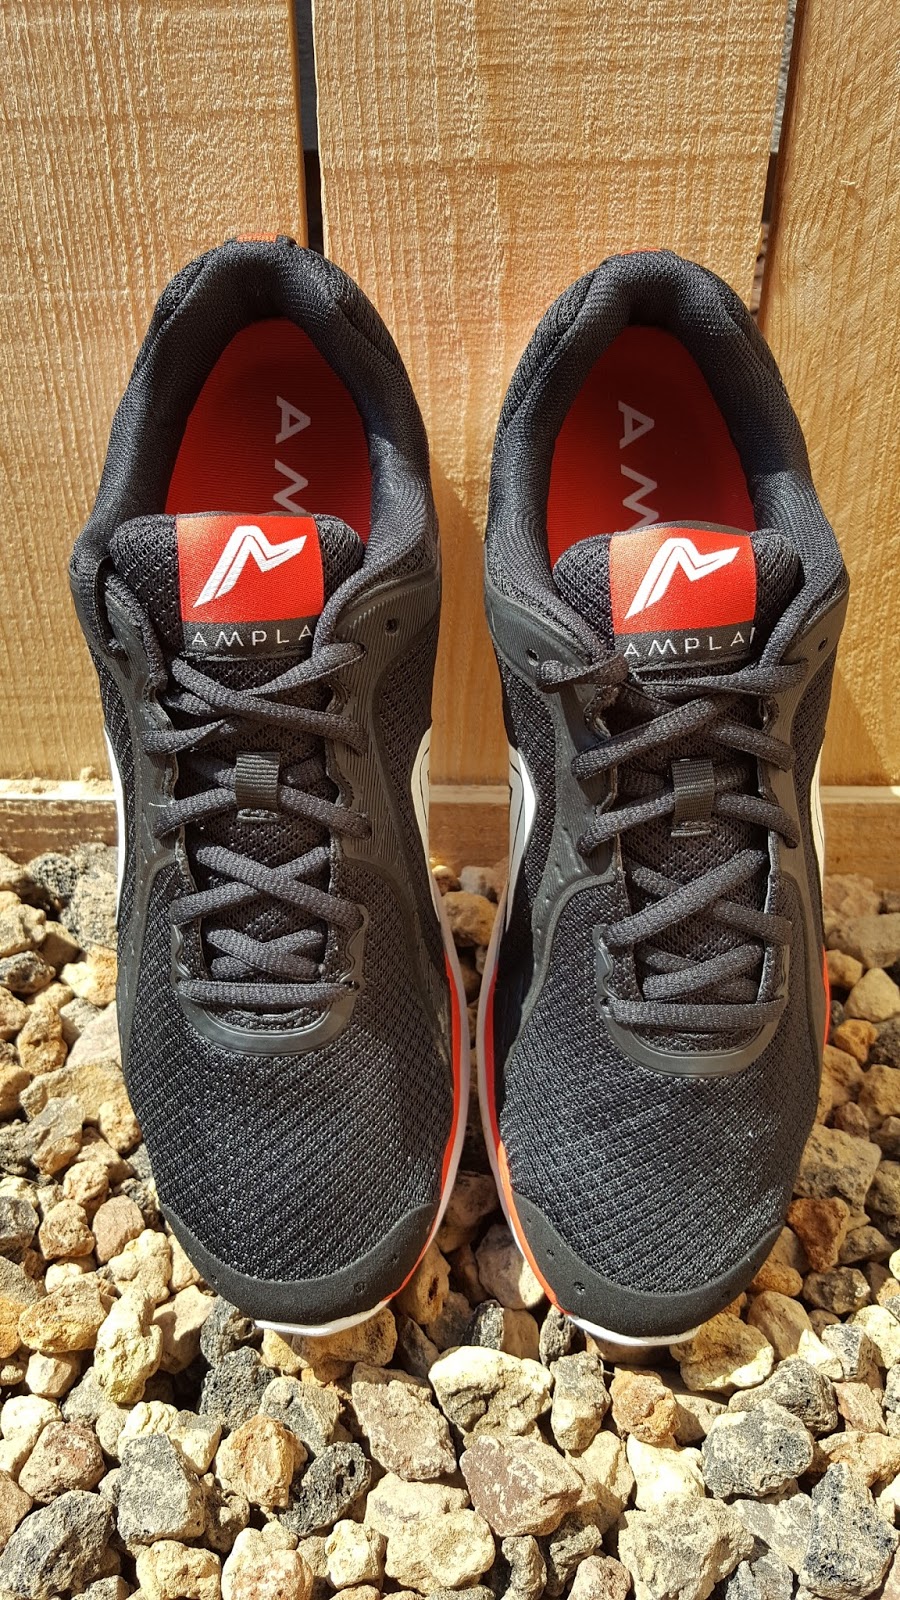 Running Without Injuries: Ampla Fly 6 month Review